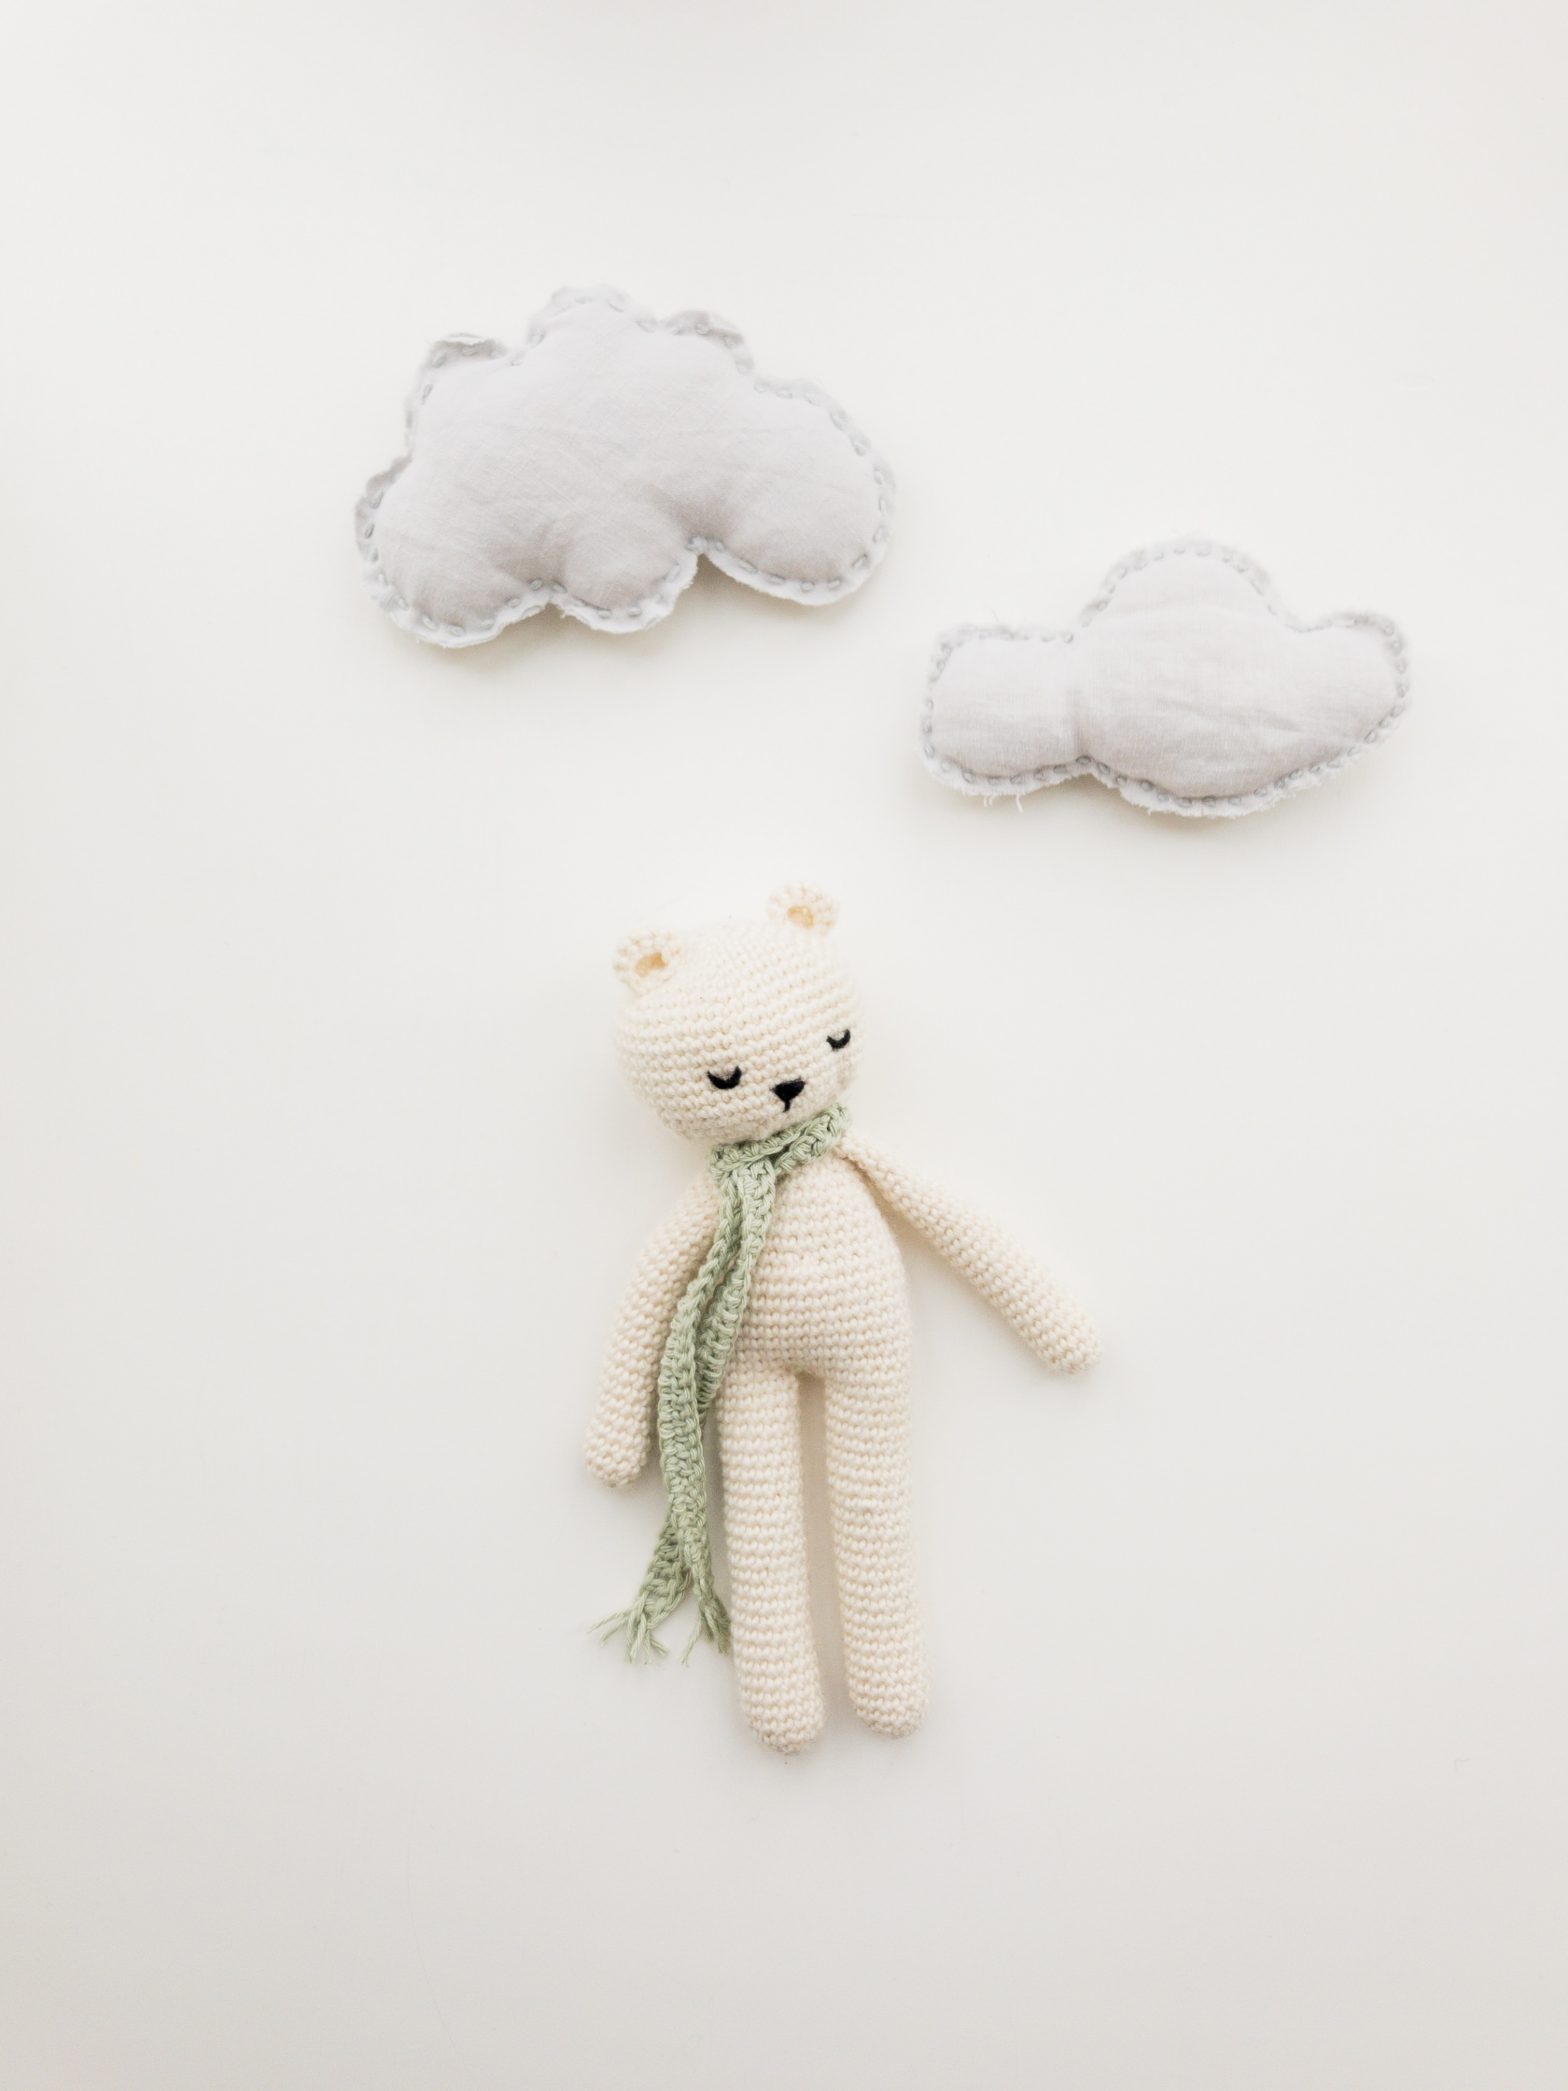 A woollen soft toy is flat-layed with two toy clouds